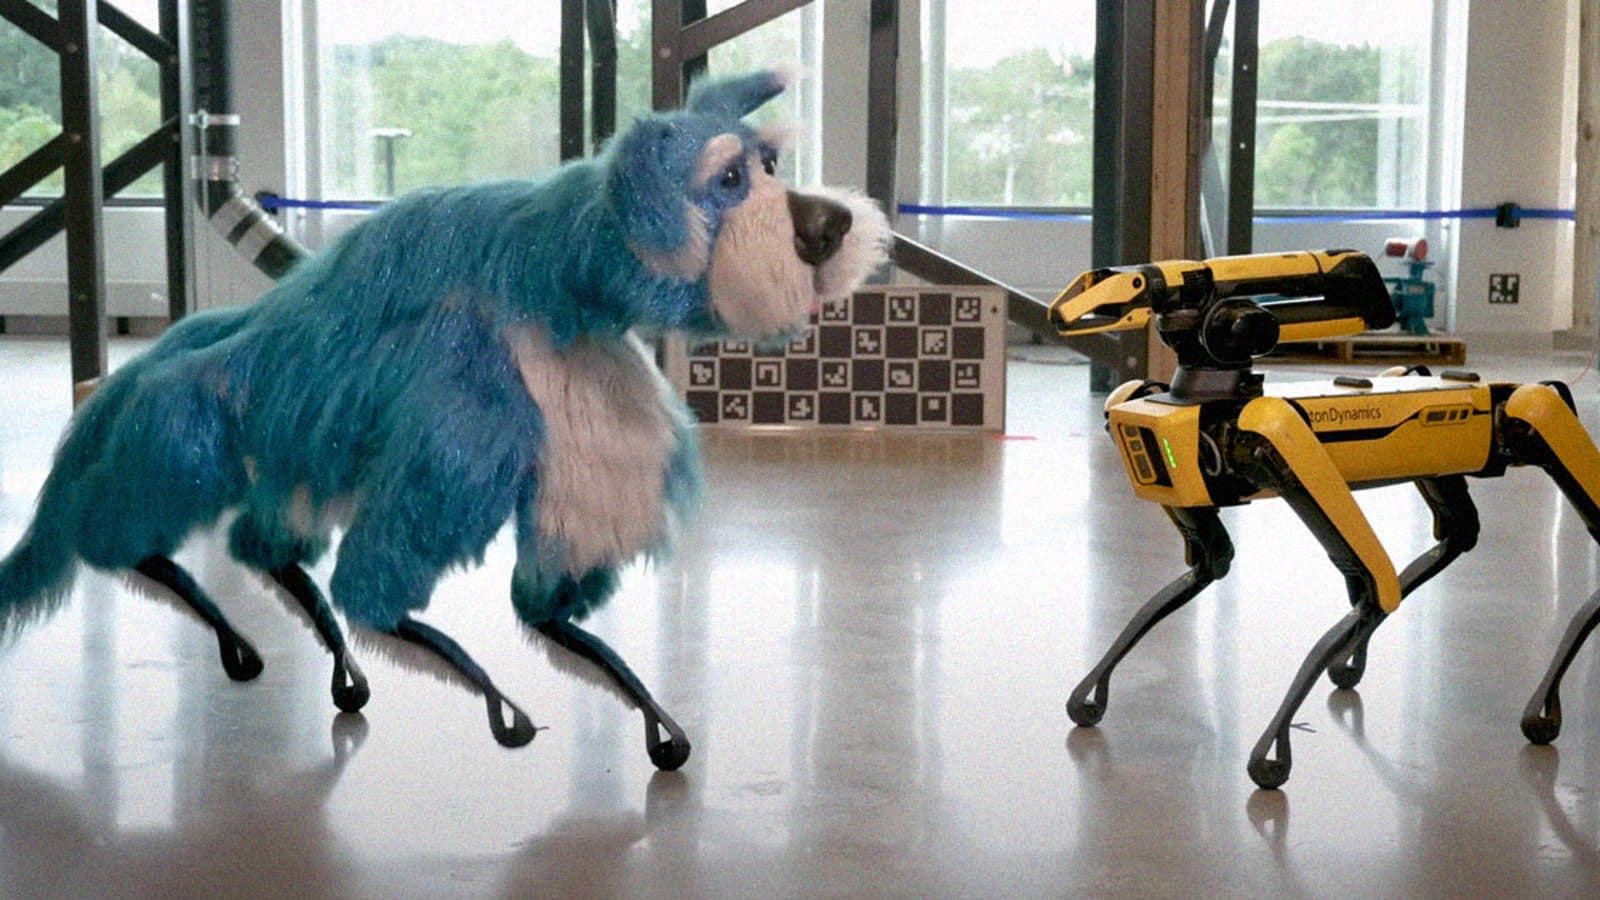 Boston Dynamics unveils its fur-covered dancing robot dog 'Sparkles'